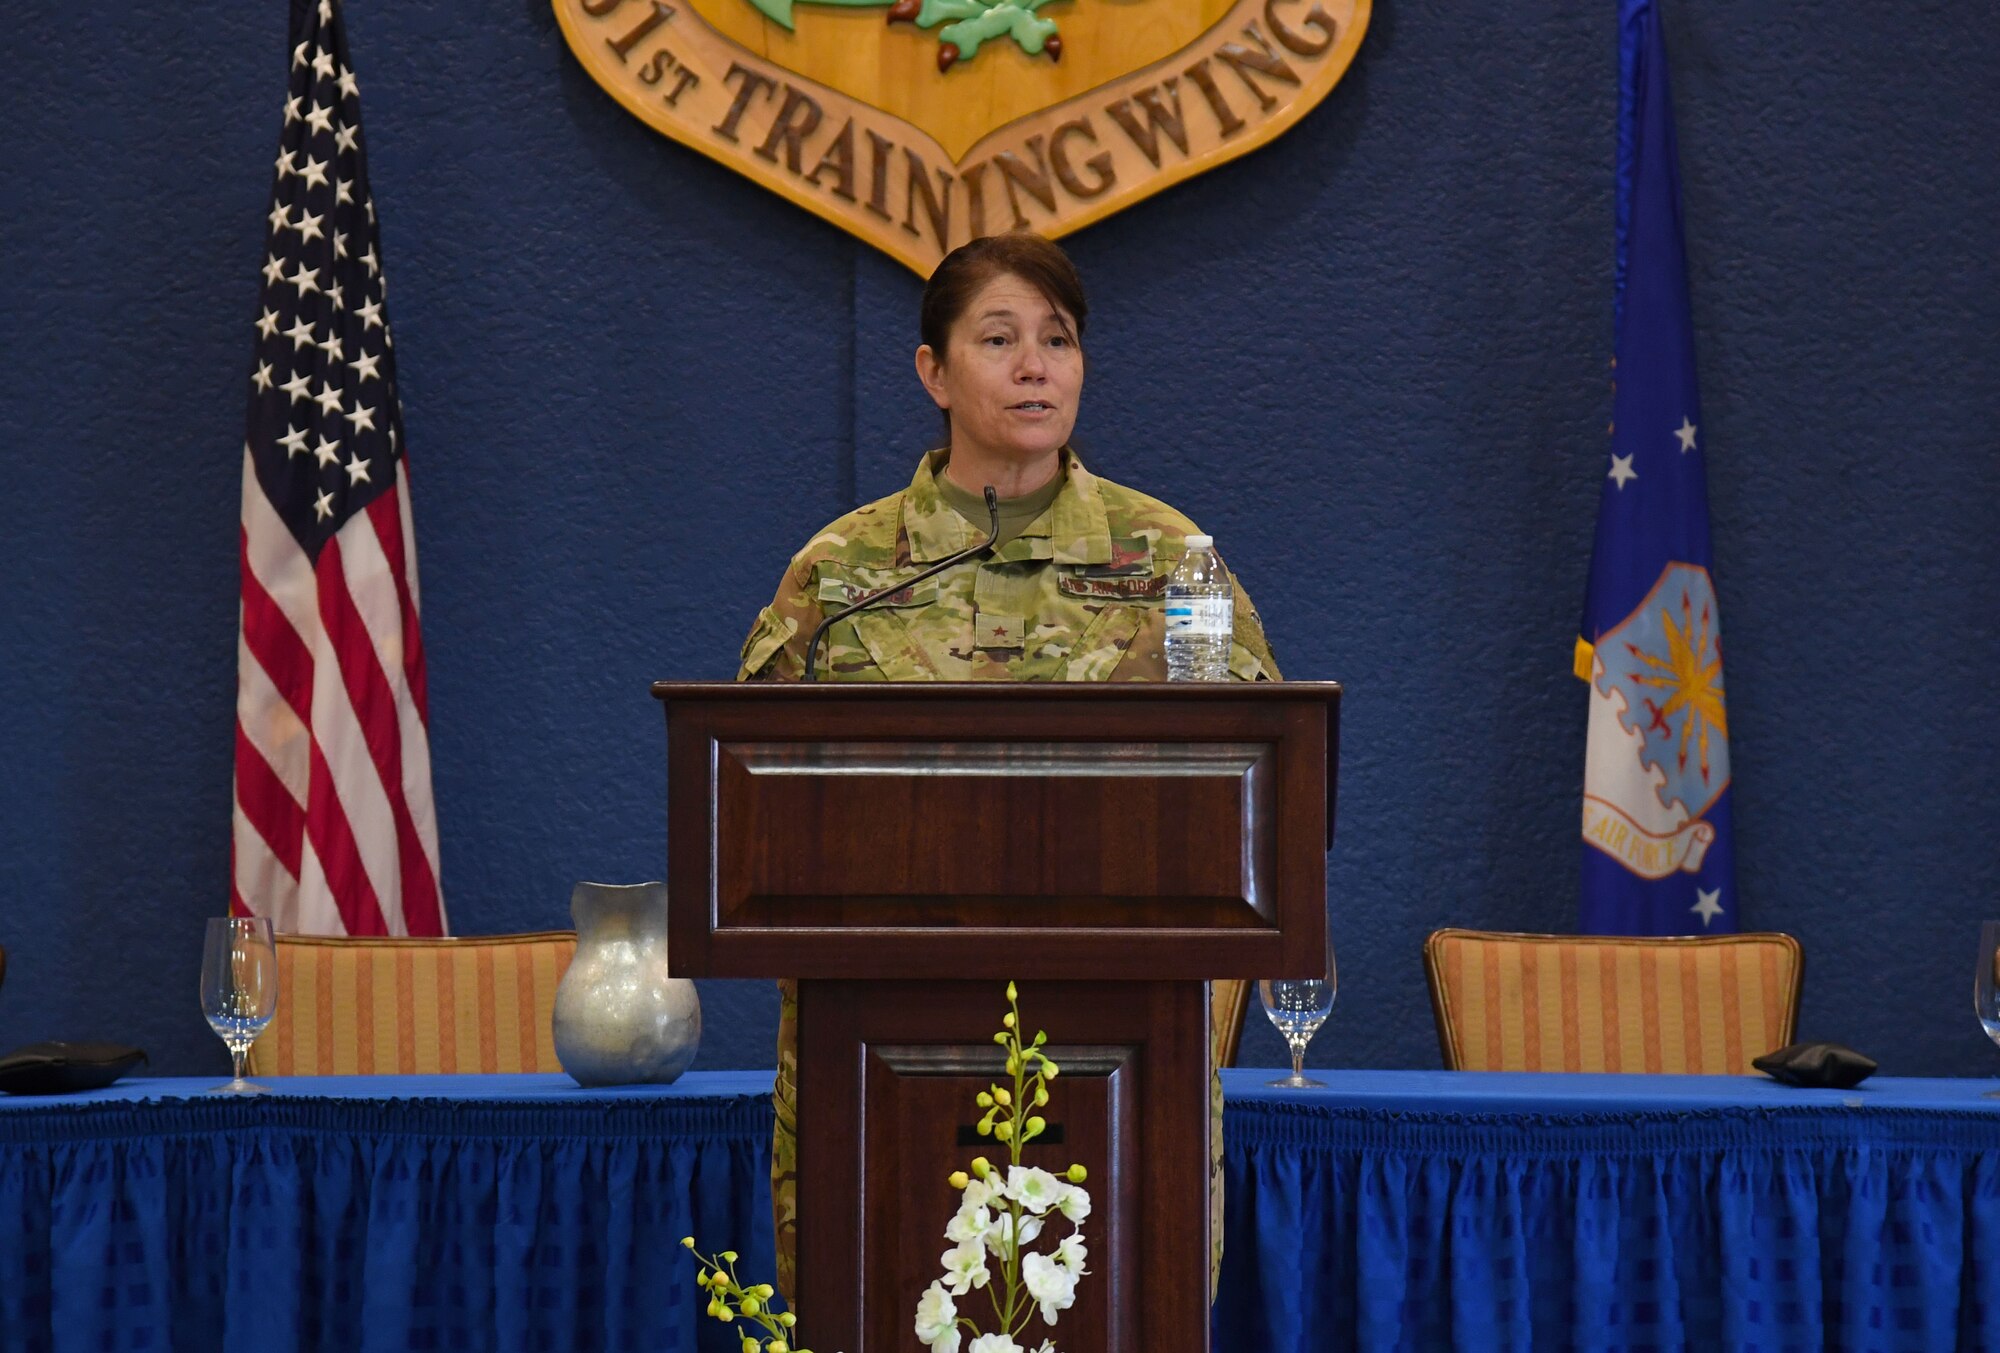 U.S. Air Force Brig. Gen. Brenda Cartier, 19th Air Force vice commander, delivers remarks for Pride Month inside the Bay Breeze Event Center at Keesler Air Force Base, Mississippi, June 15, 2021. Keesler celebrates Pride Month throughout June, with events such as a scavenger hunt, discussion panel and an LGBTQ+ informational expo. (U.S. Air Force photo by Kemberly Groue)